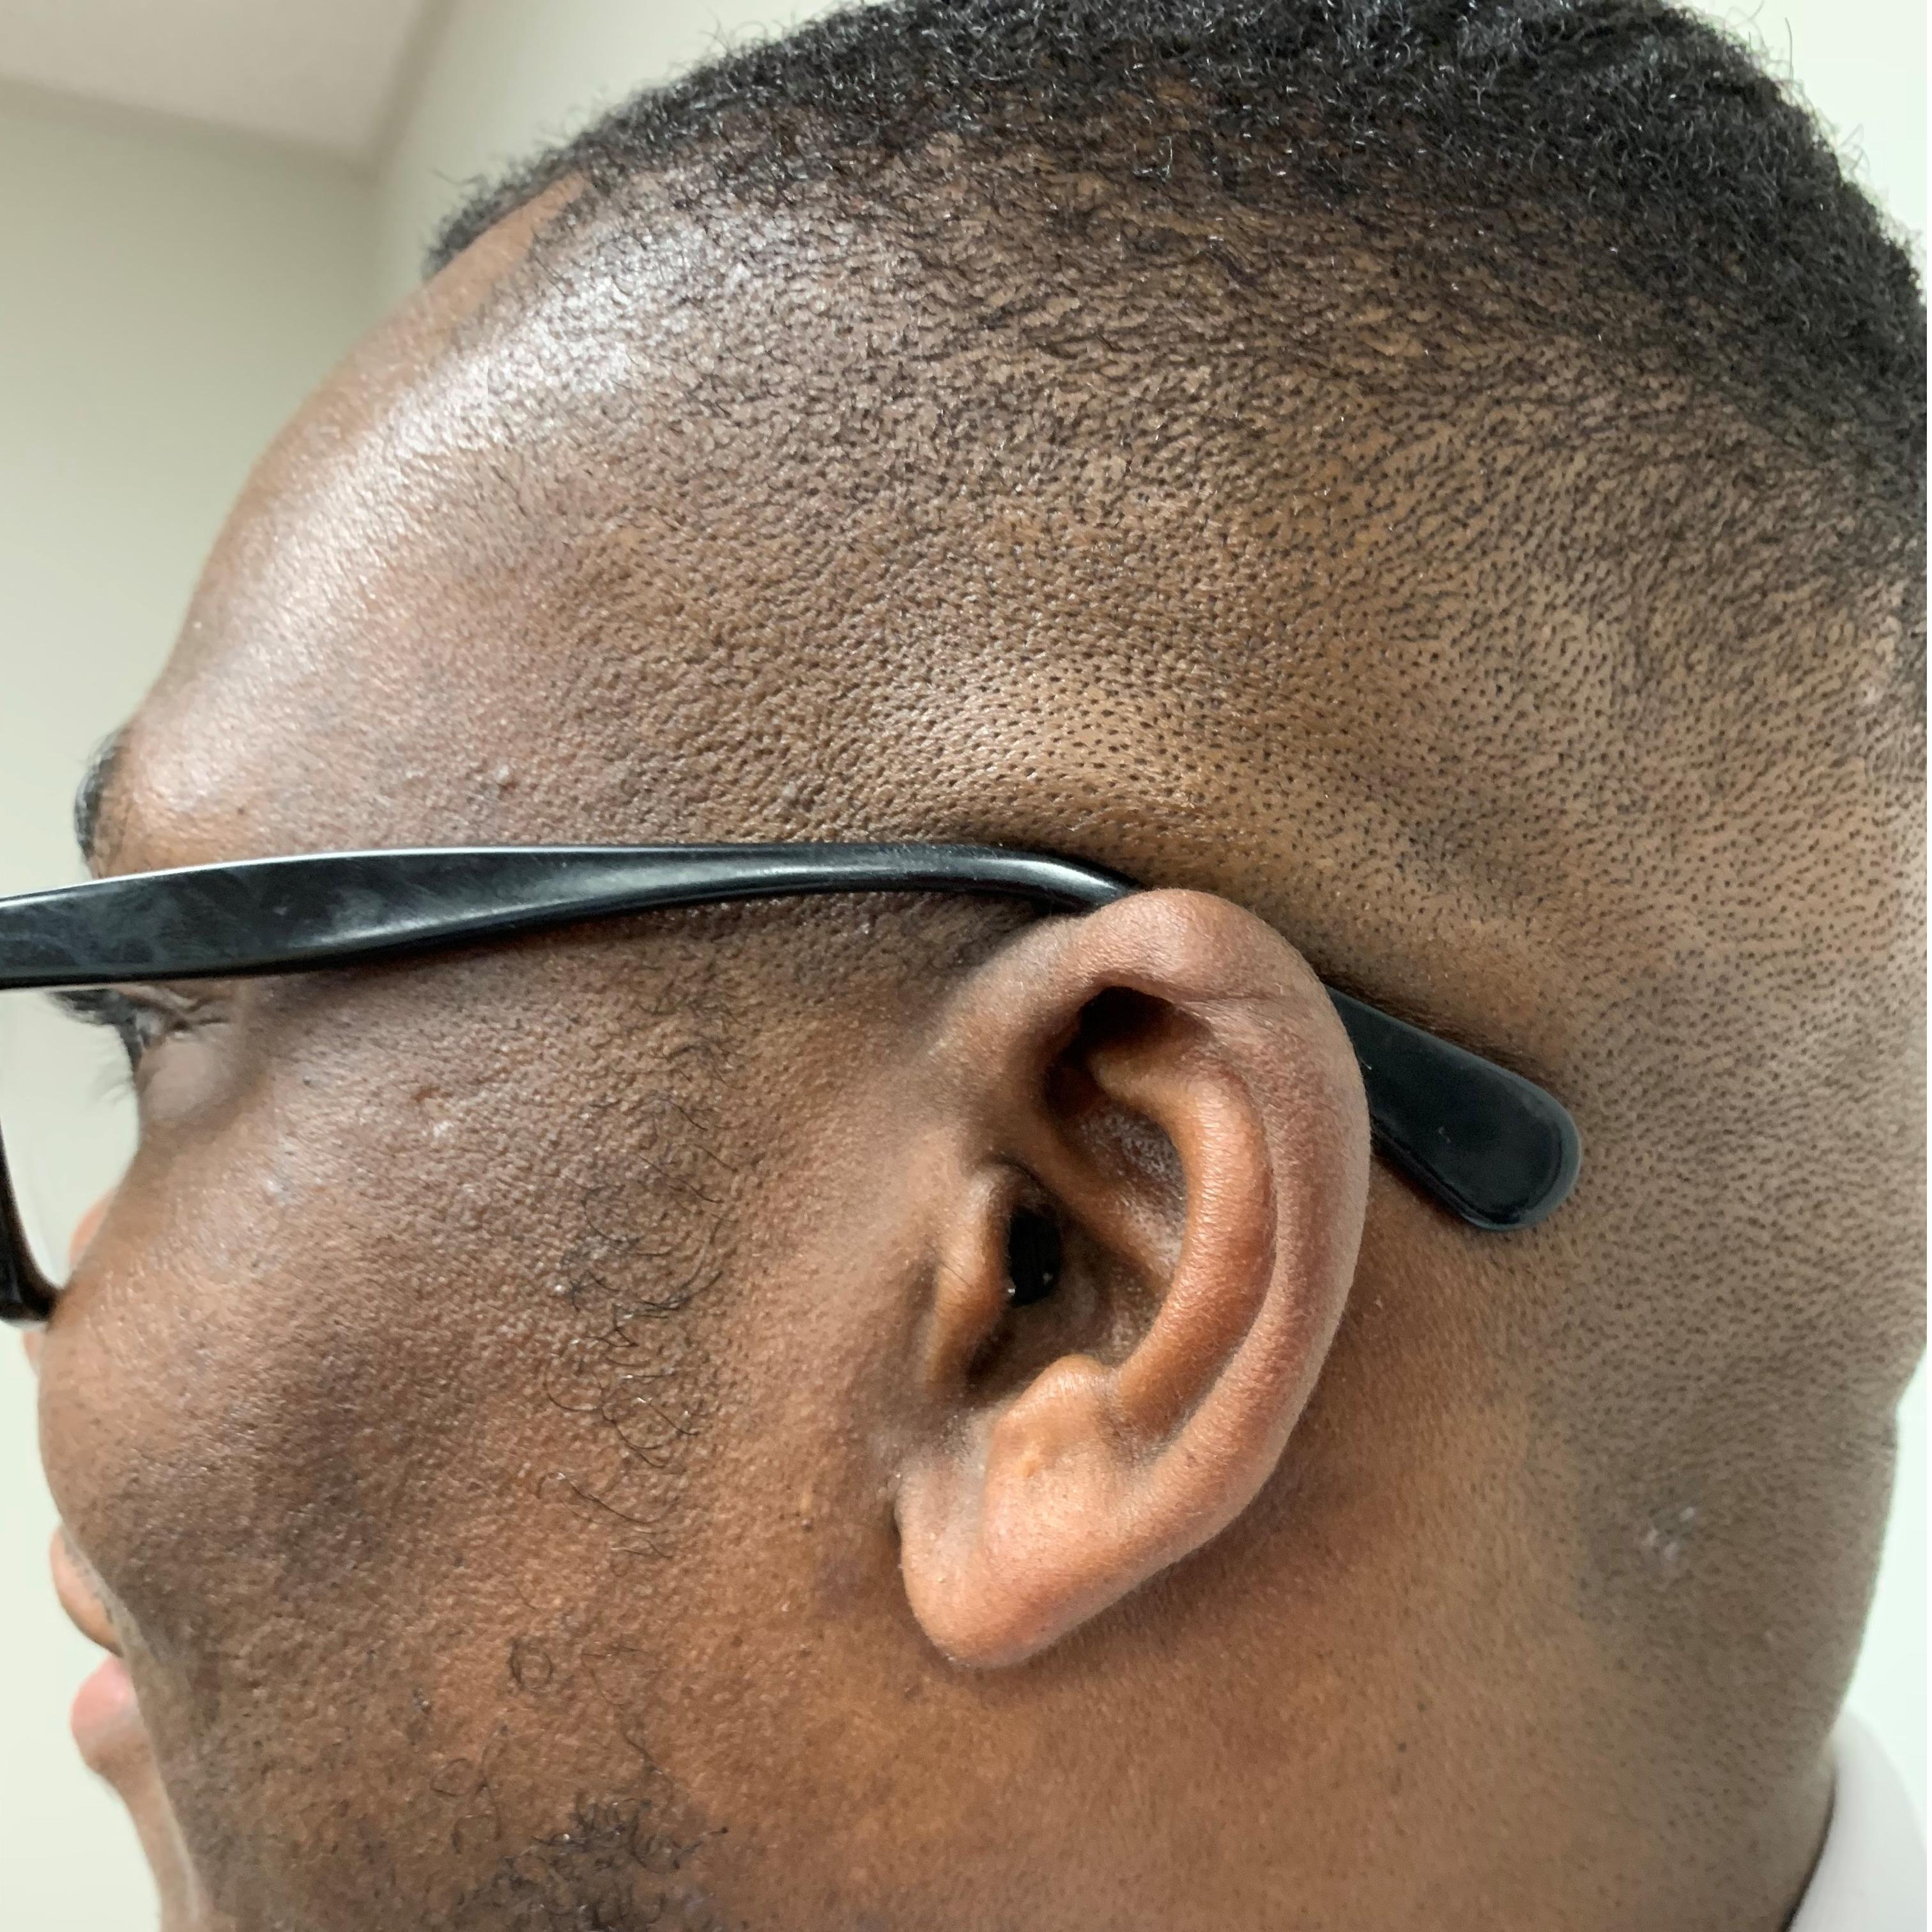 Advanced Hearing Solutions of Greenville Photo